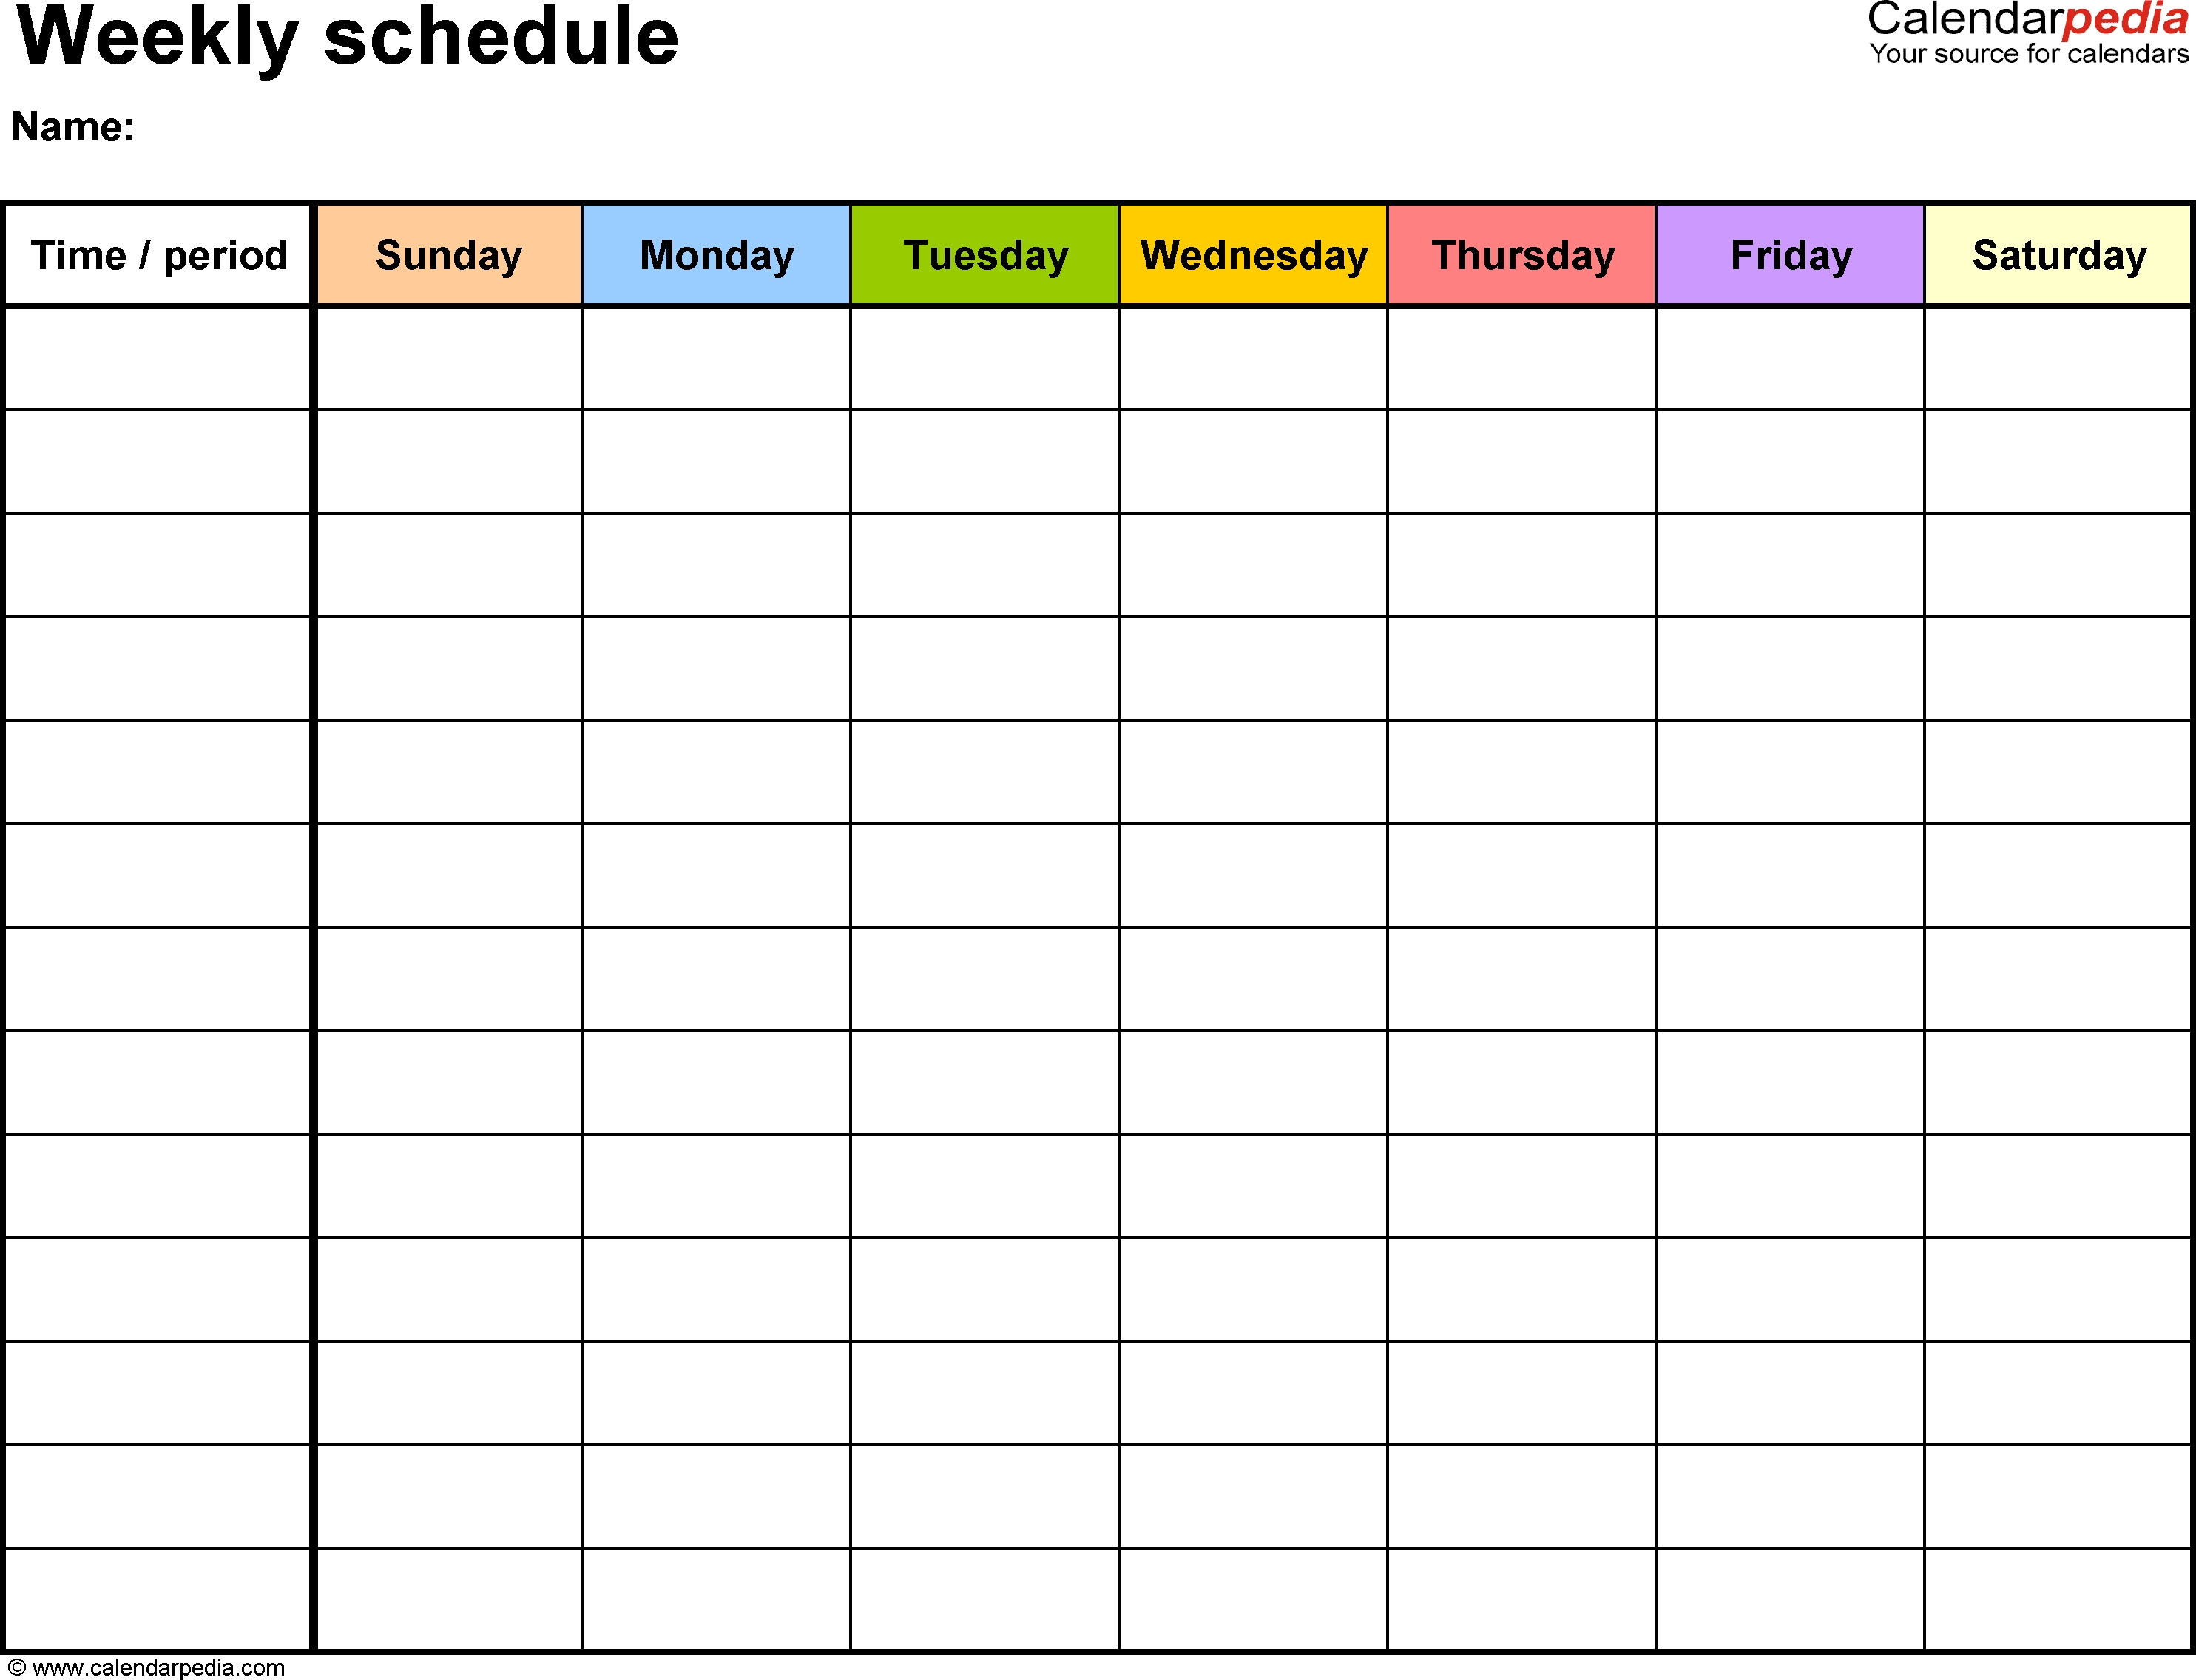 Free Weekly Schedule Templates For Excel - 18 Templates  Blank Excel Spreadsheet With Calendar